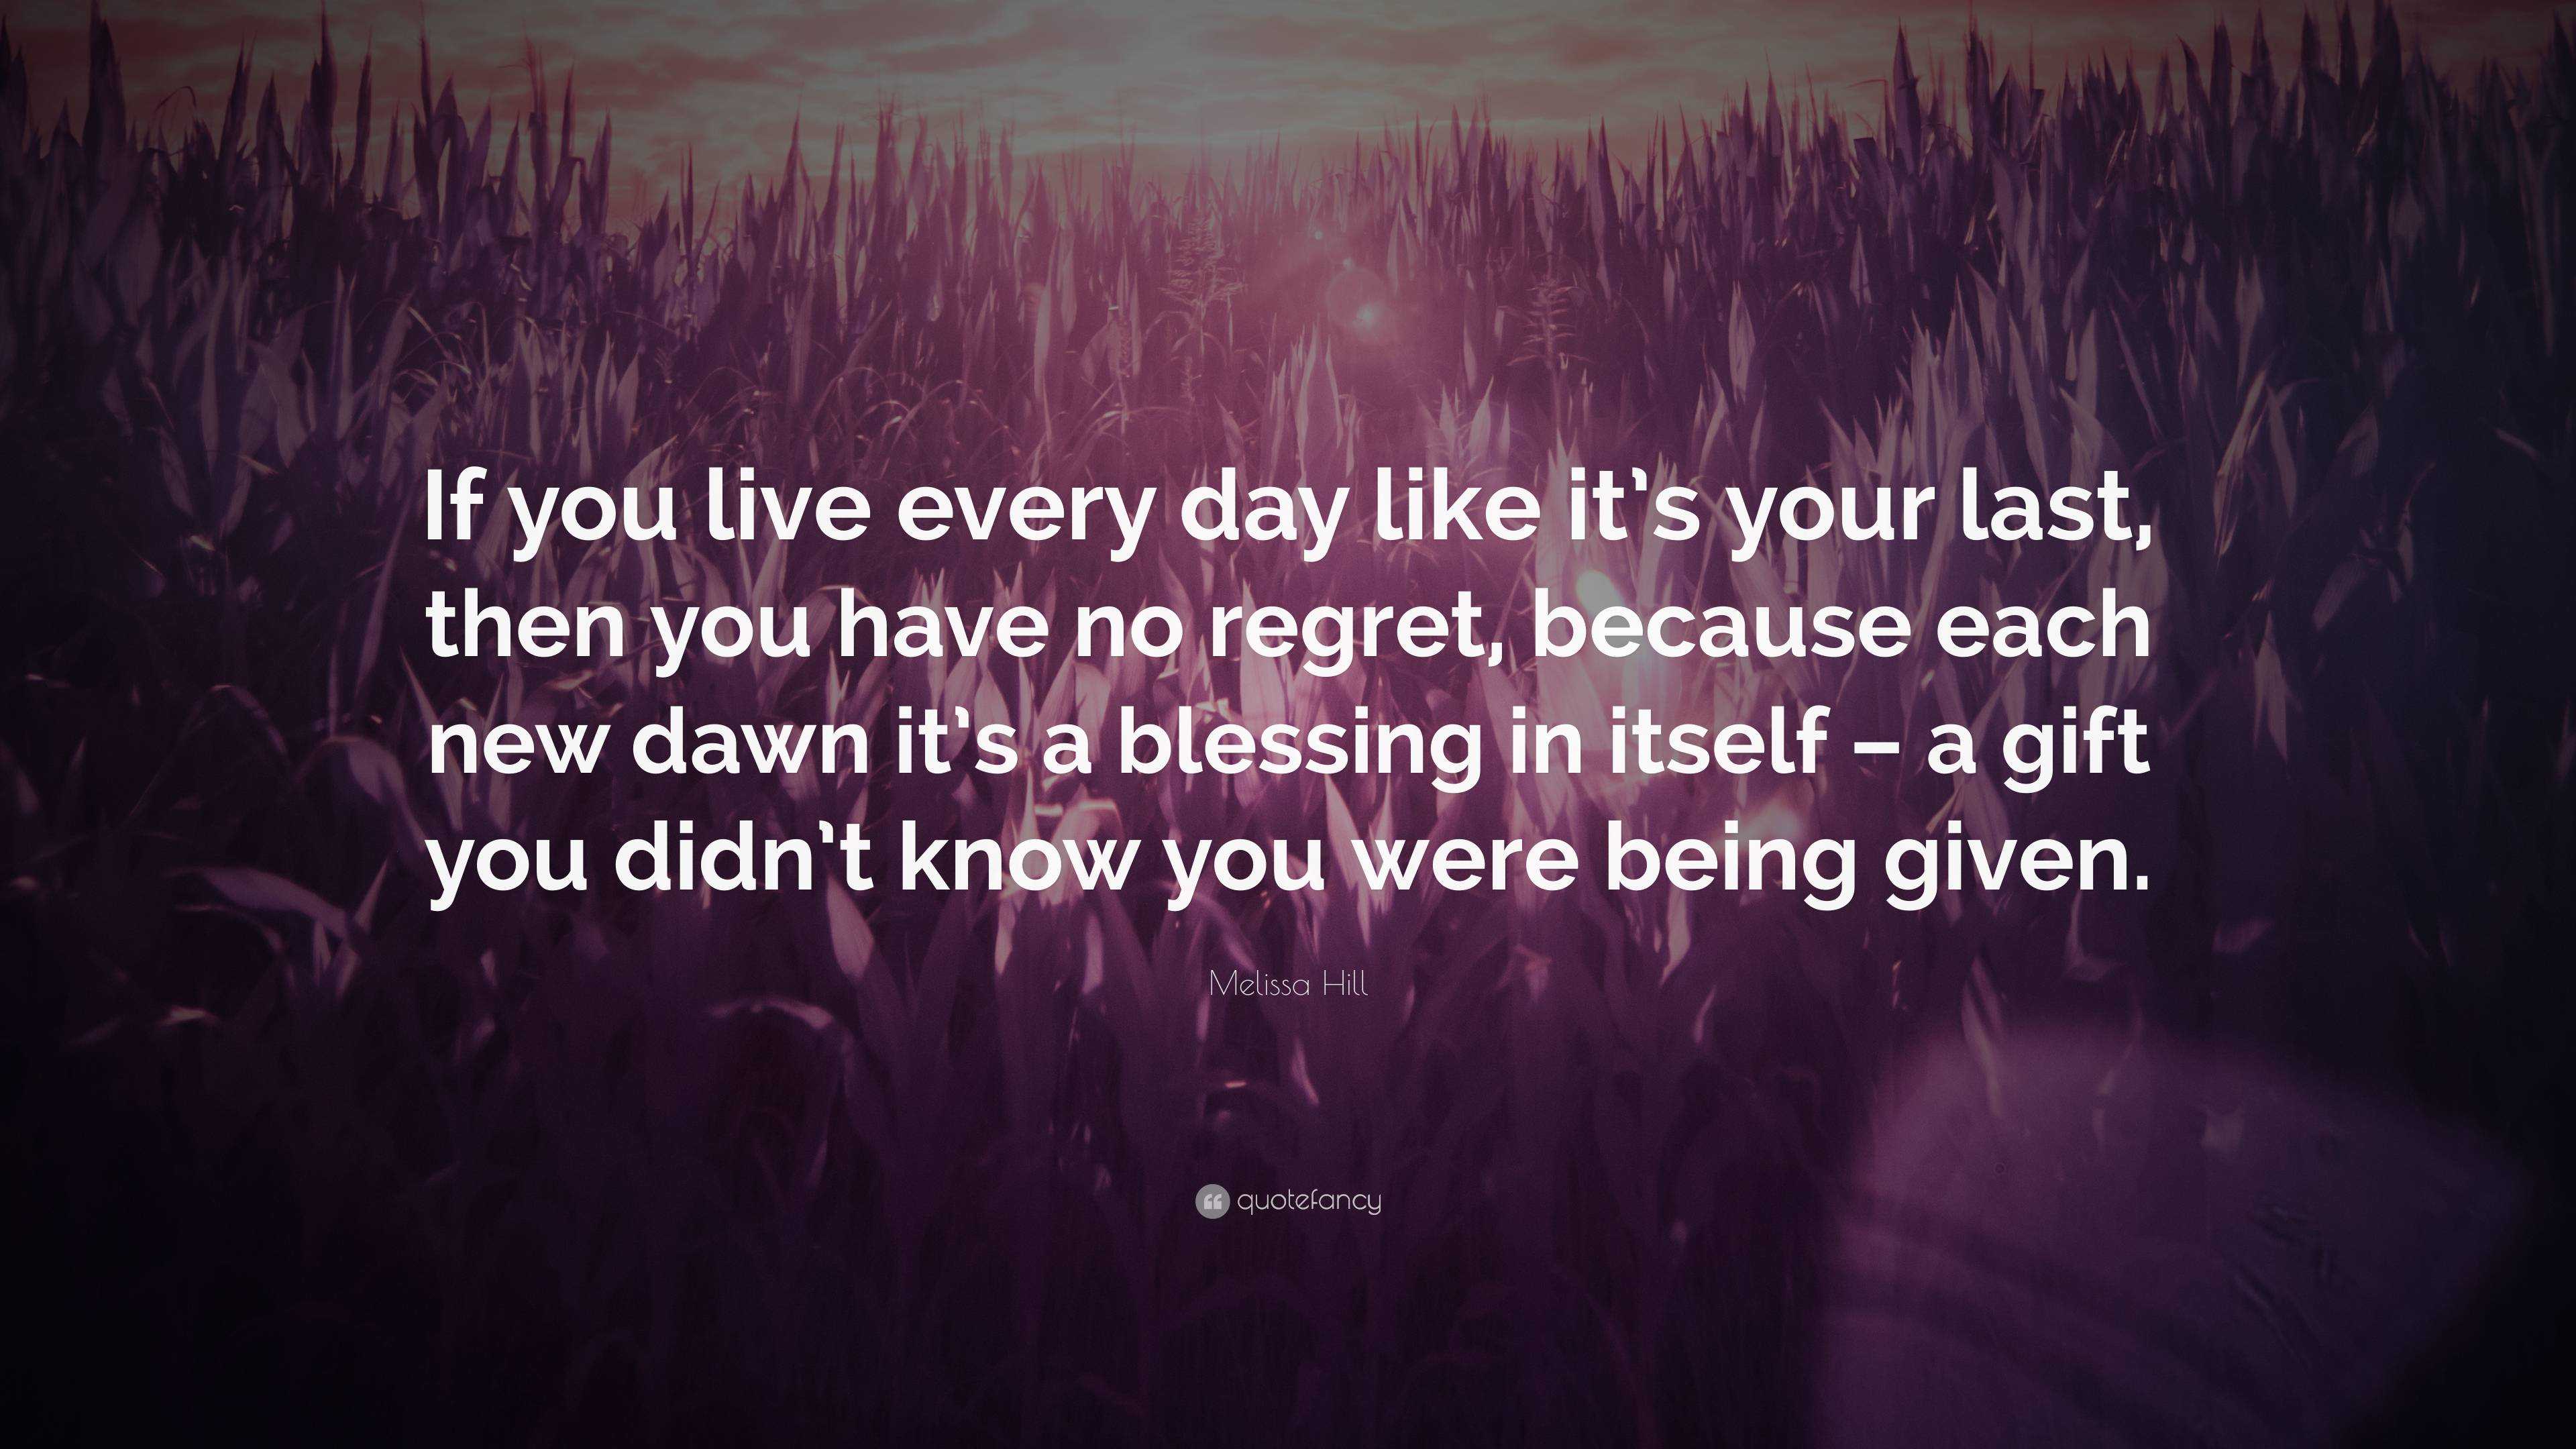 Melissa Hill Quote: “If you live every day like it's your last